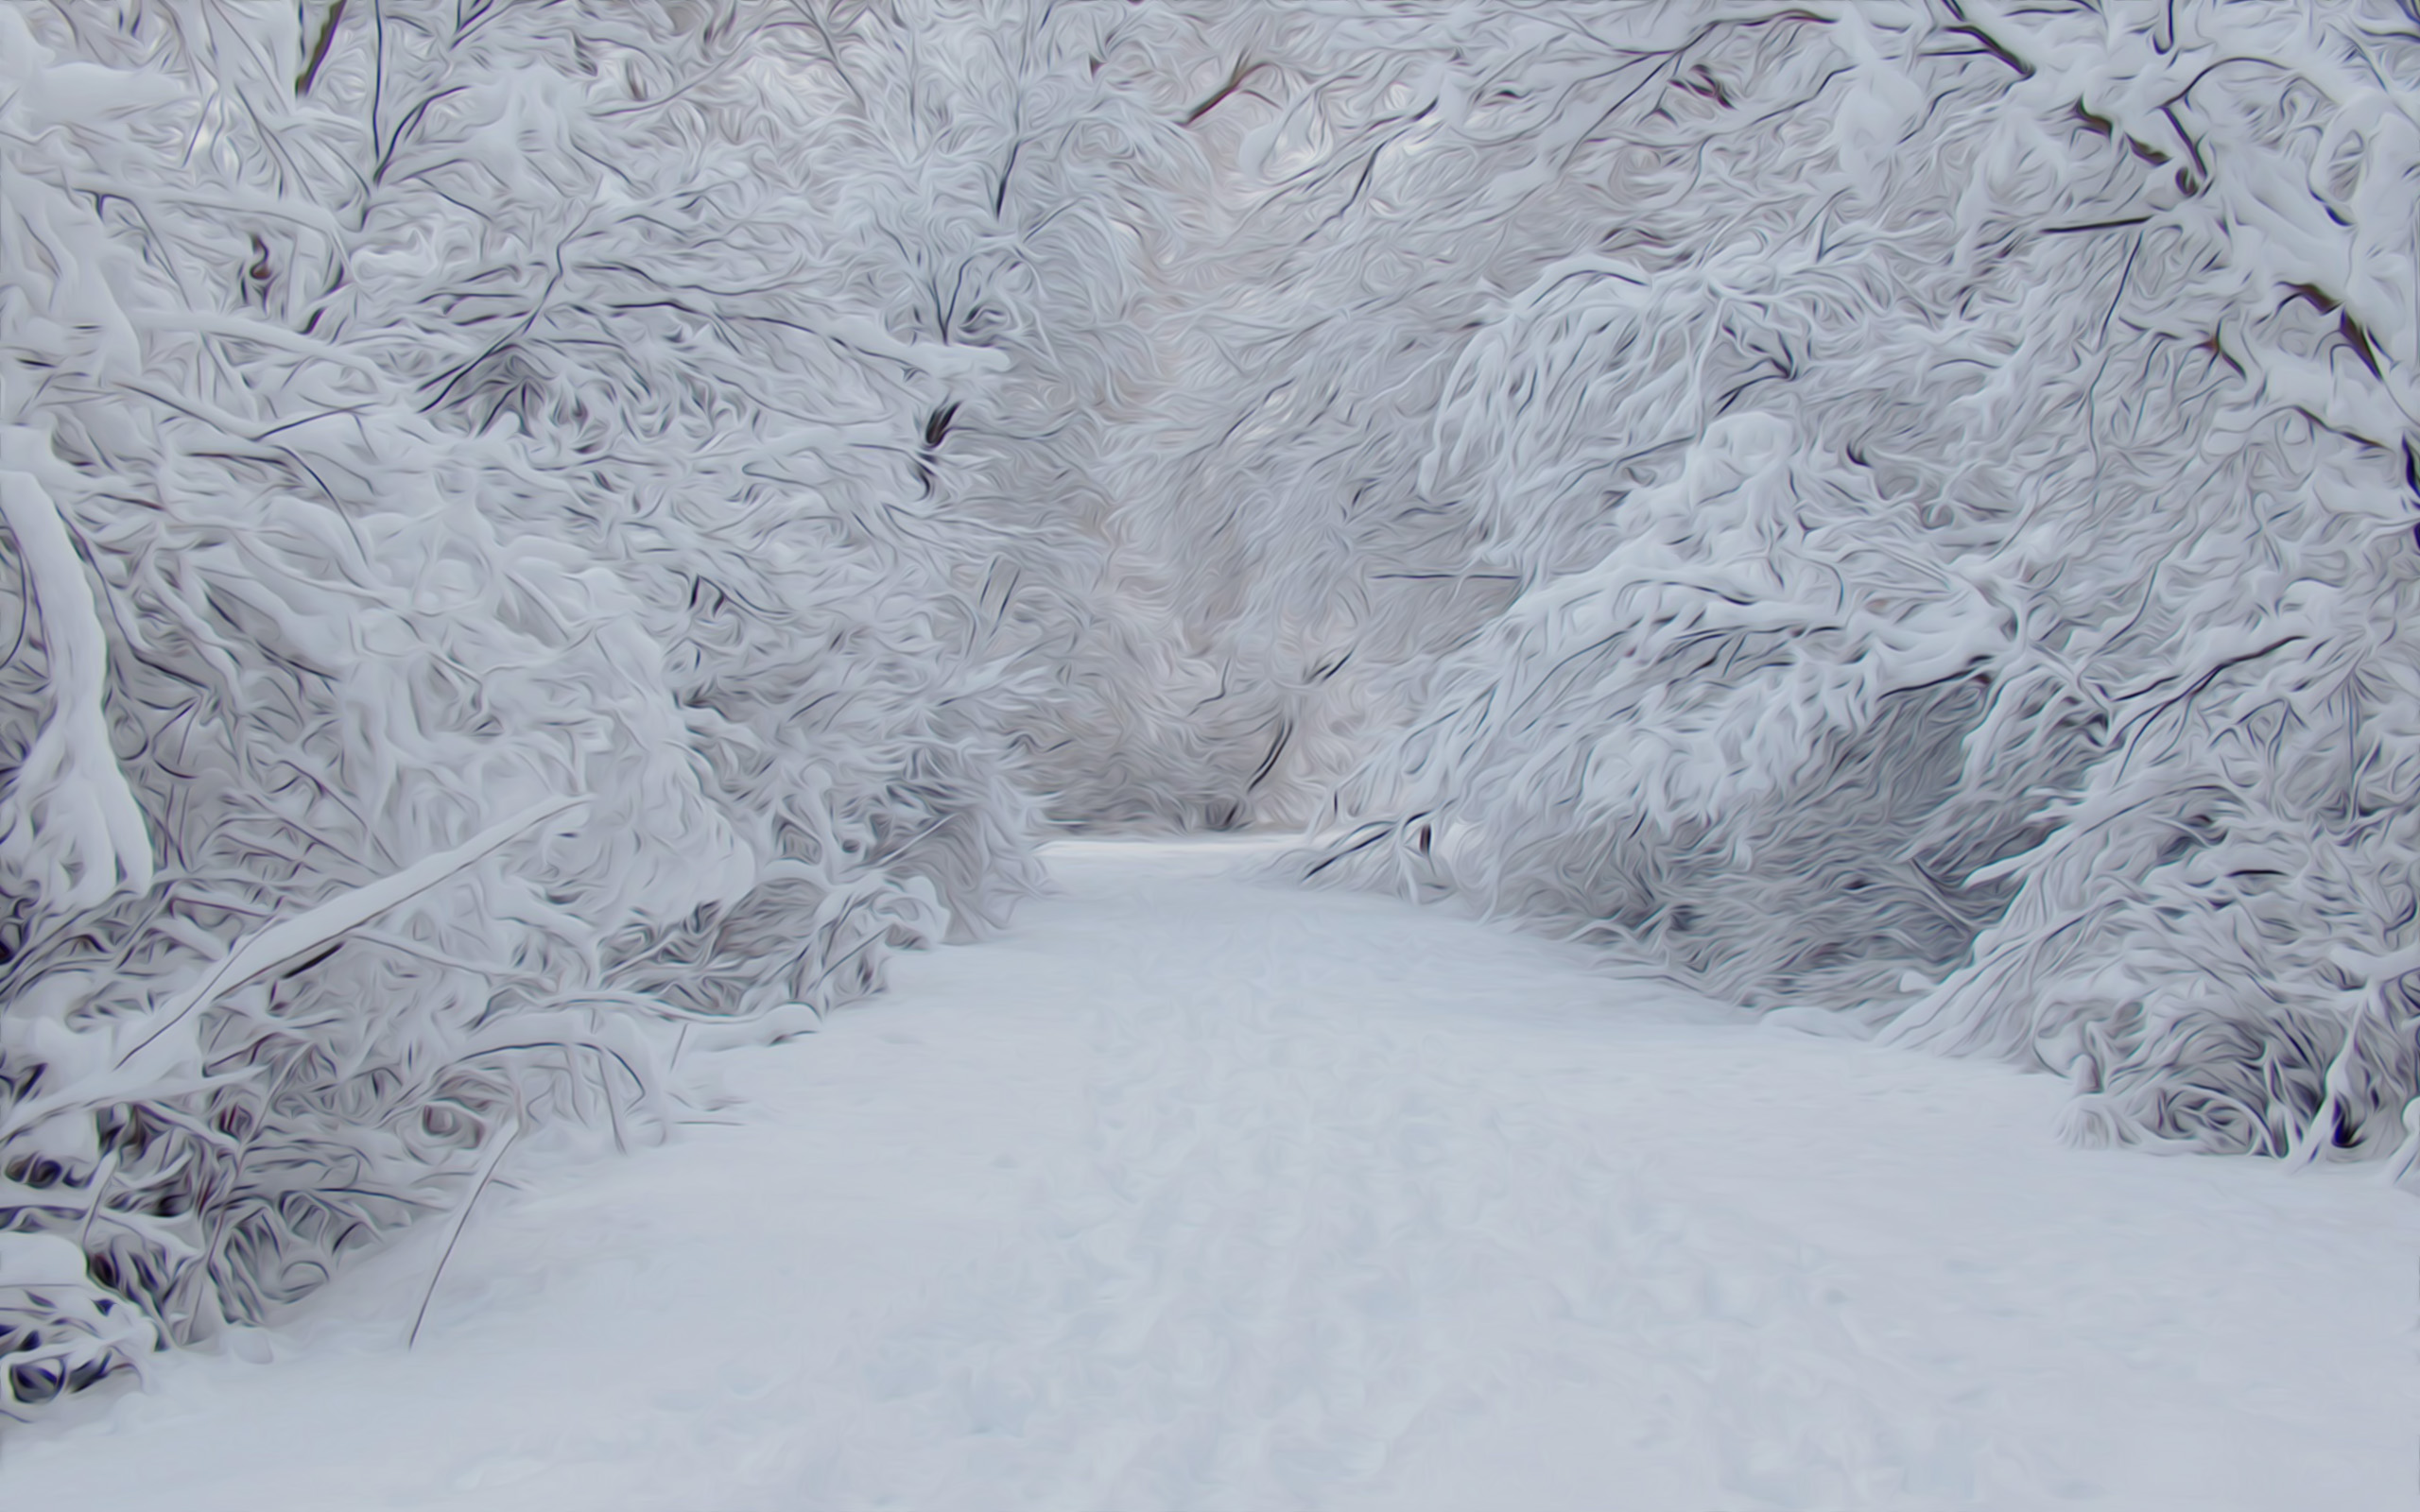 Winter Image Snowy Snow HD Wallpaper And Background Photos